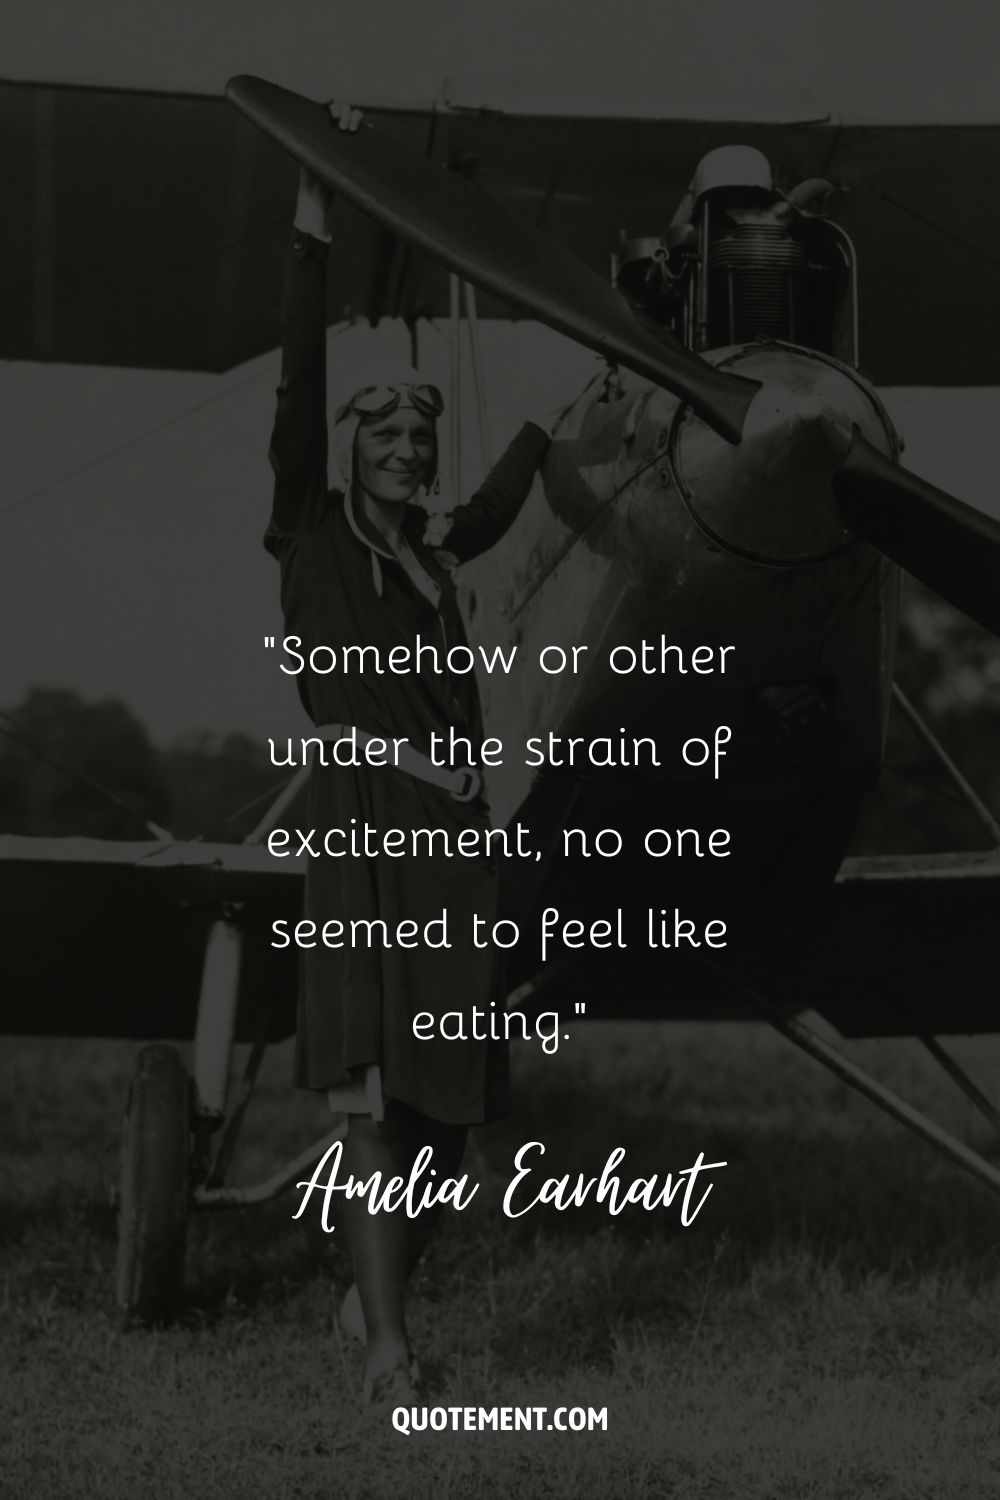 “Somehow or other under the strain of excitement, no one seemed to feel like eating.” ― Amelia Earhart, The Fun of It